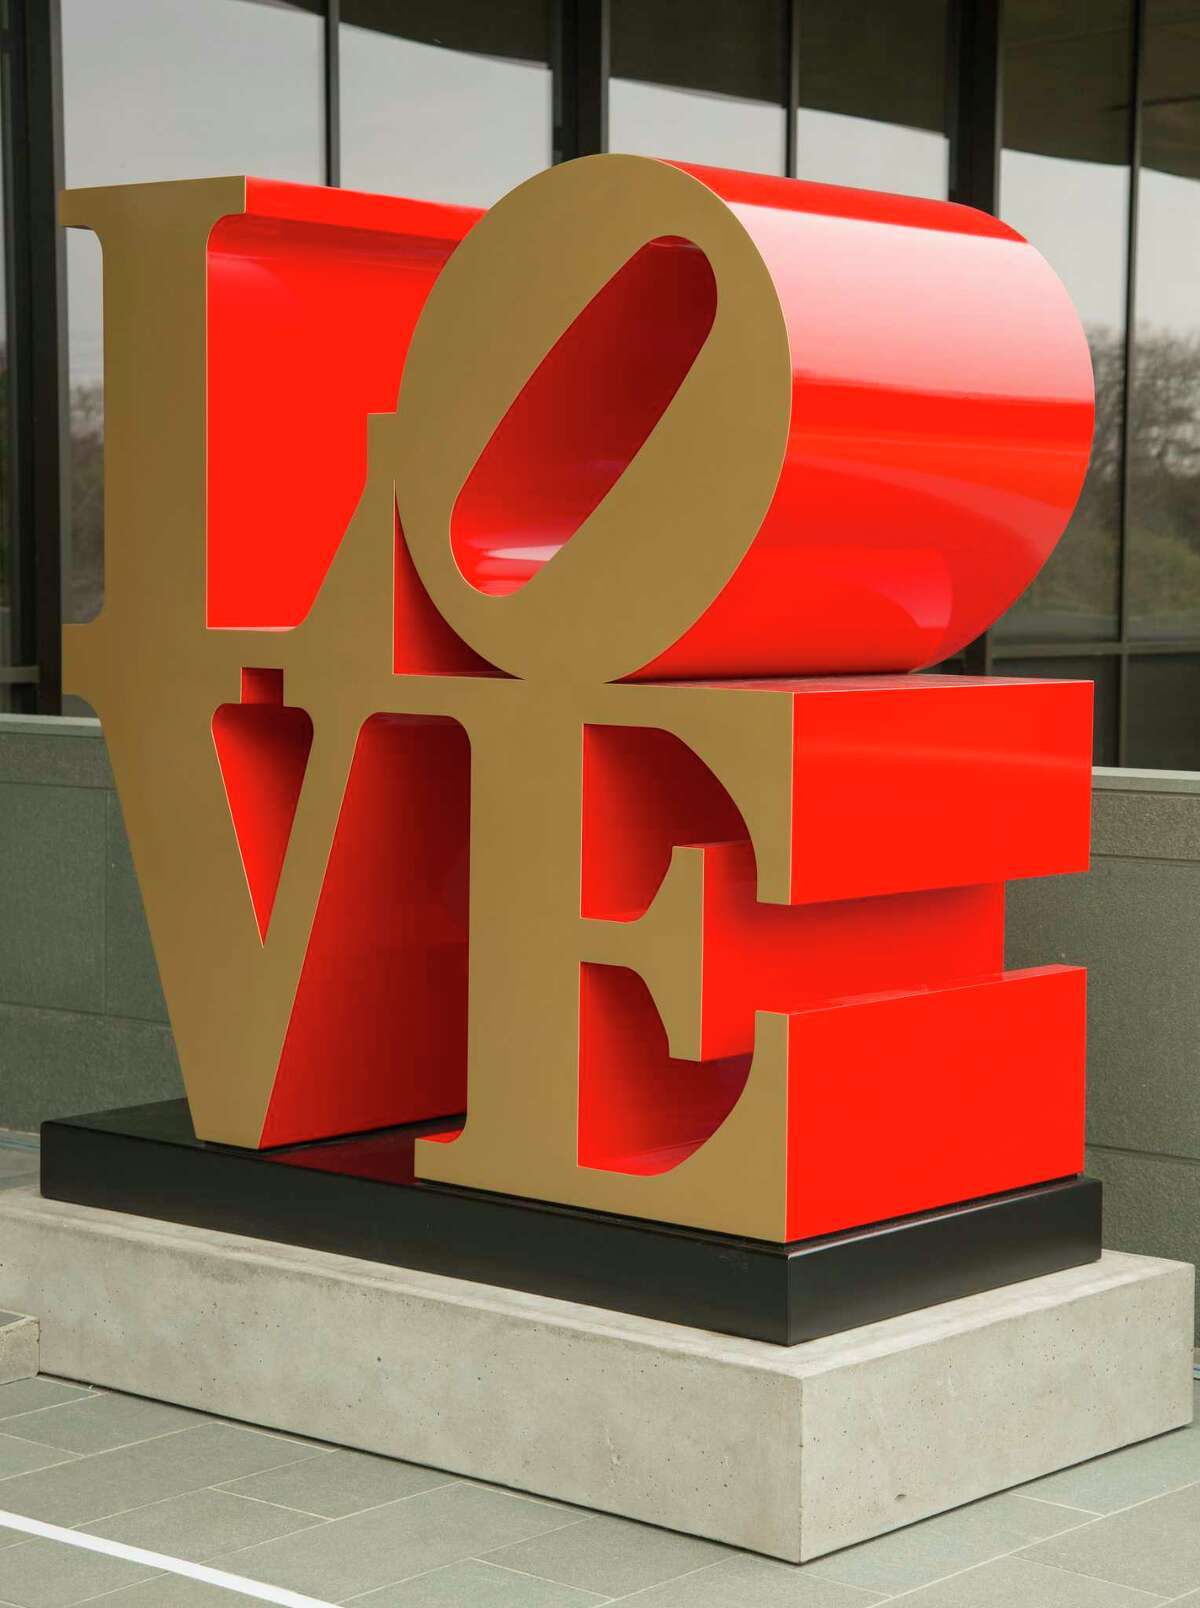 Robert Indiana’s painted aluminum “Love” is on display on the grounds of the McNay Art Museum. The museum is exploring the artist’s work in “Robert Indiana: A Legacy of Love.”